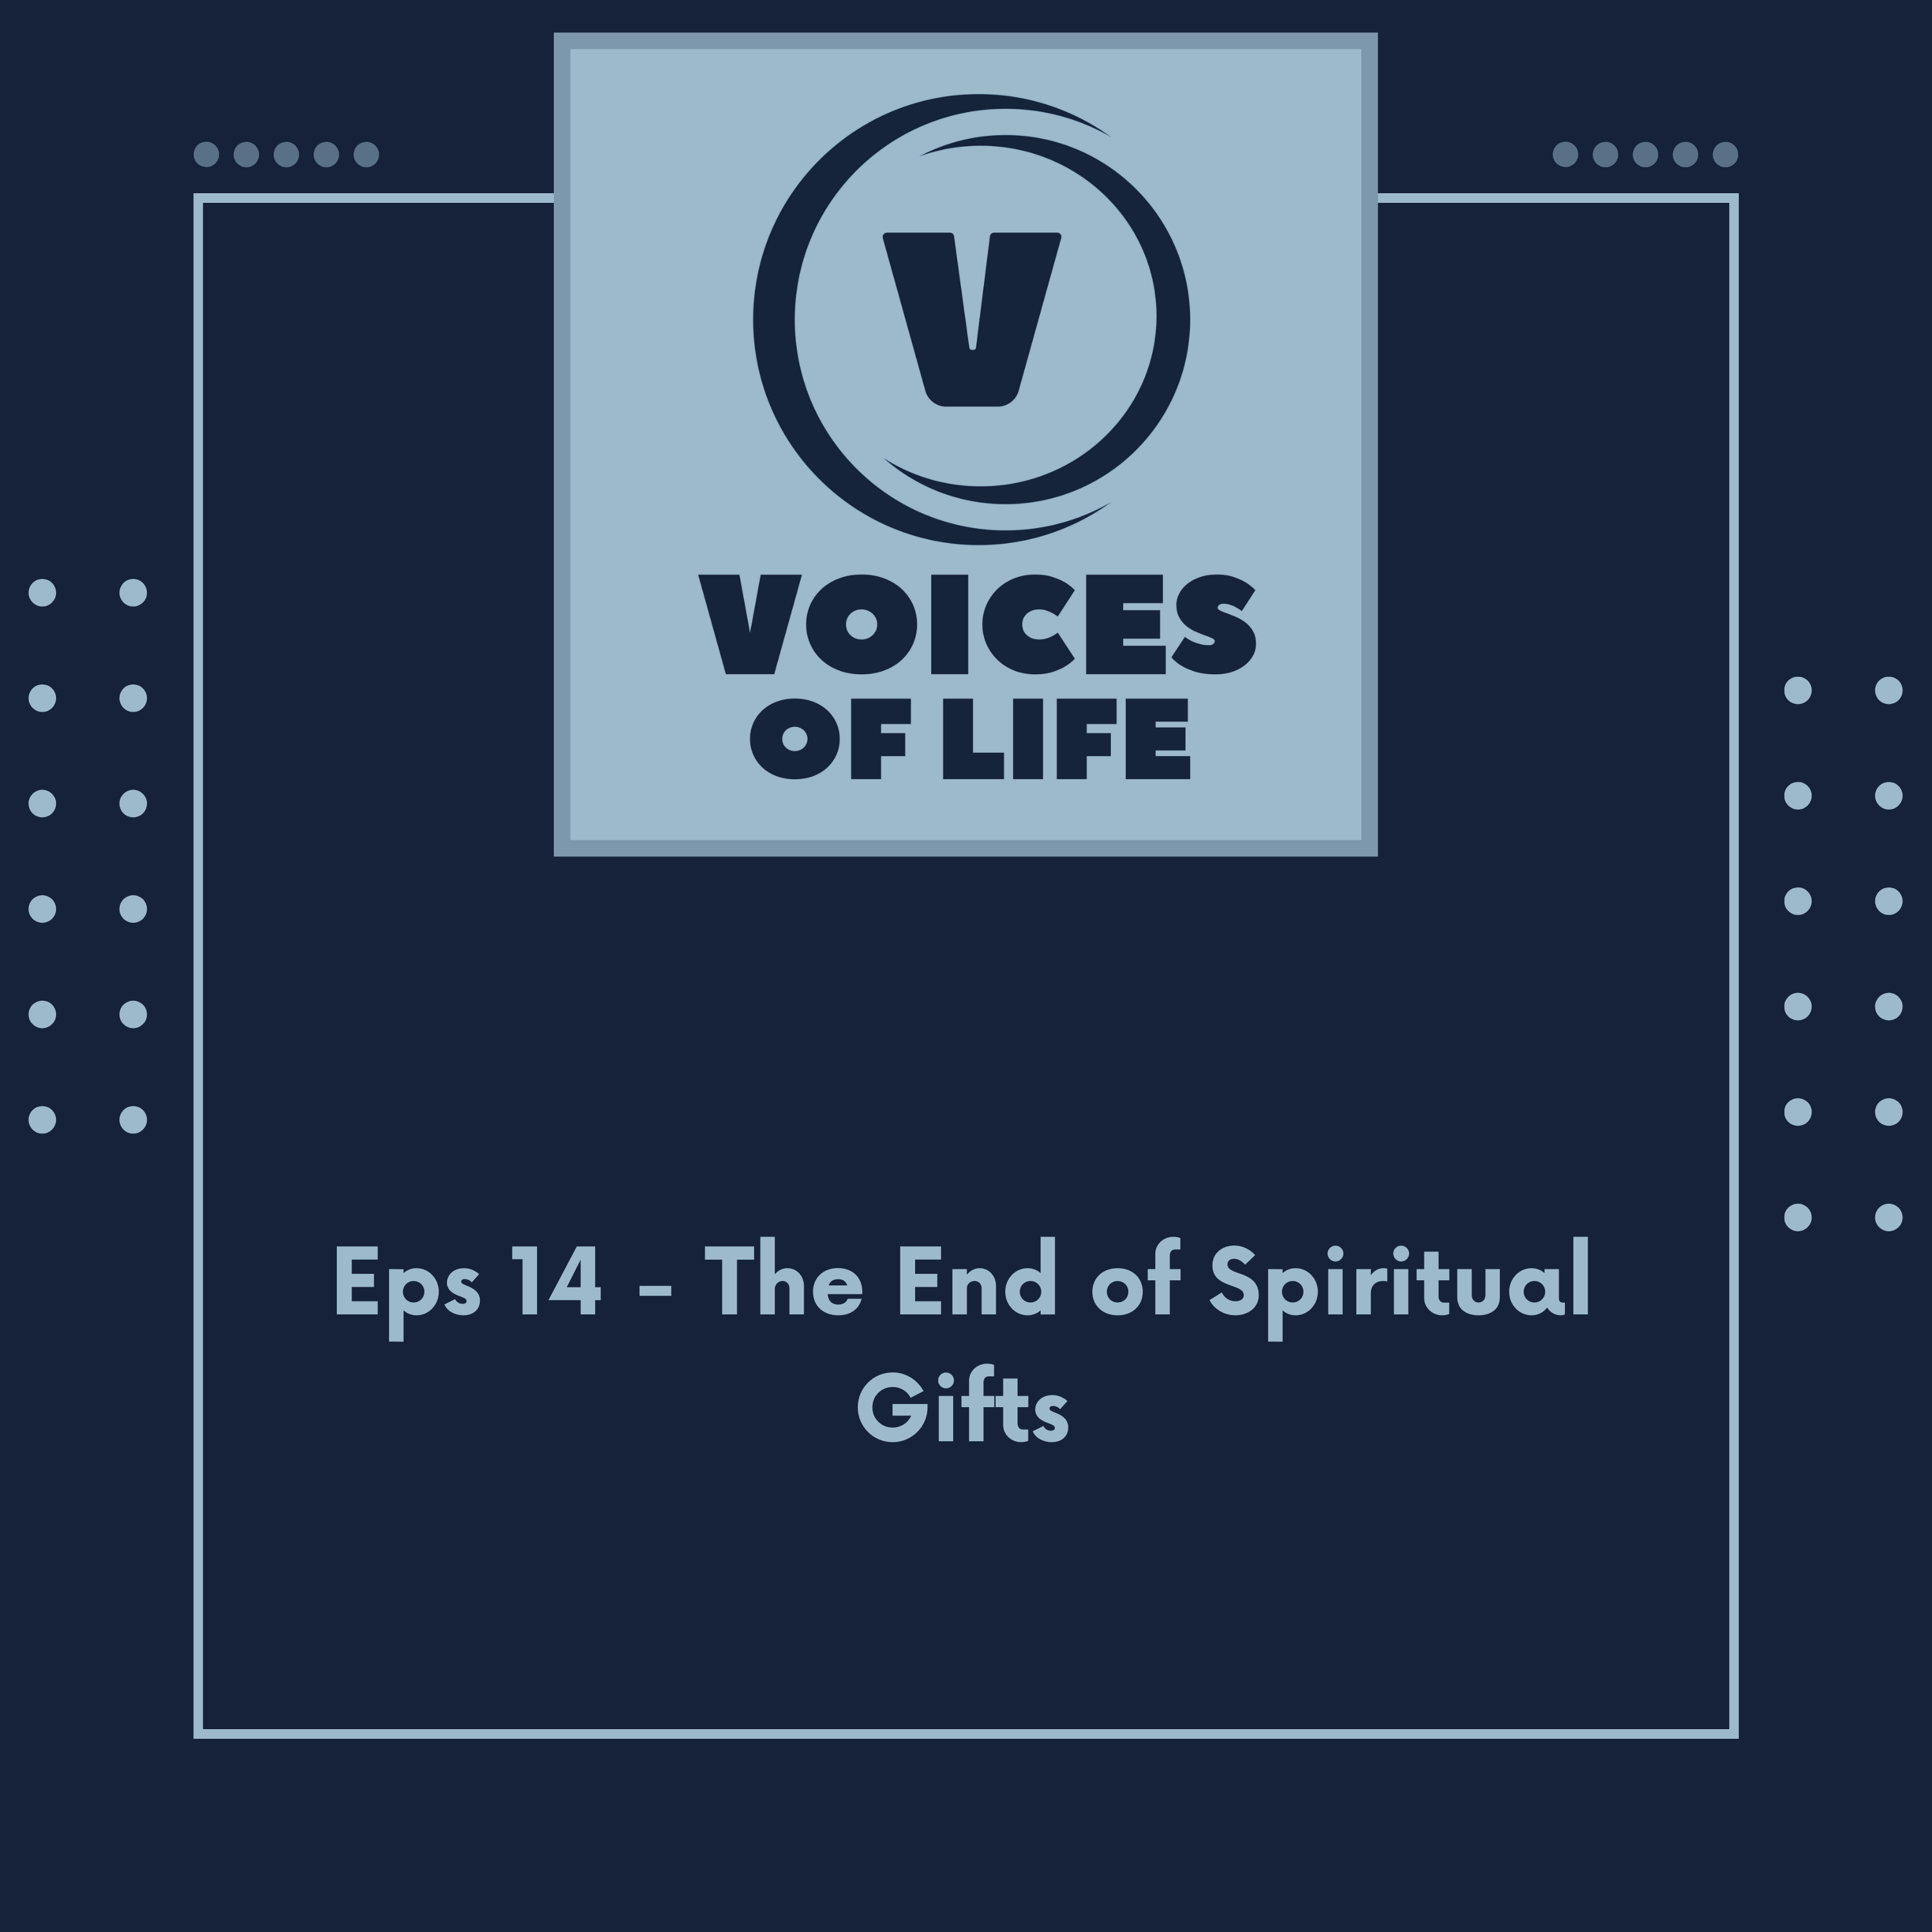 The End of Spiritual Gifts?